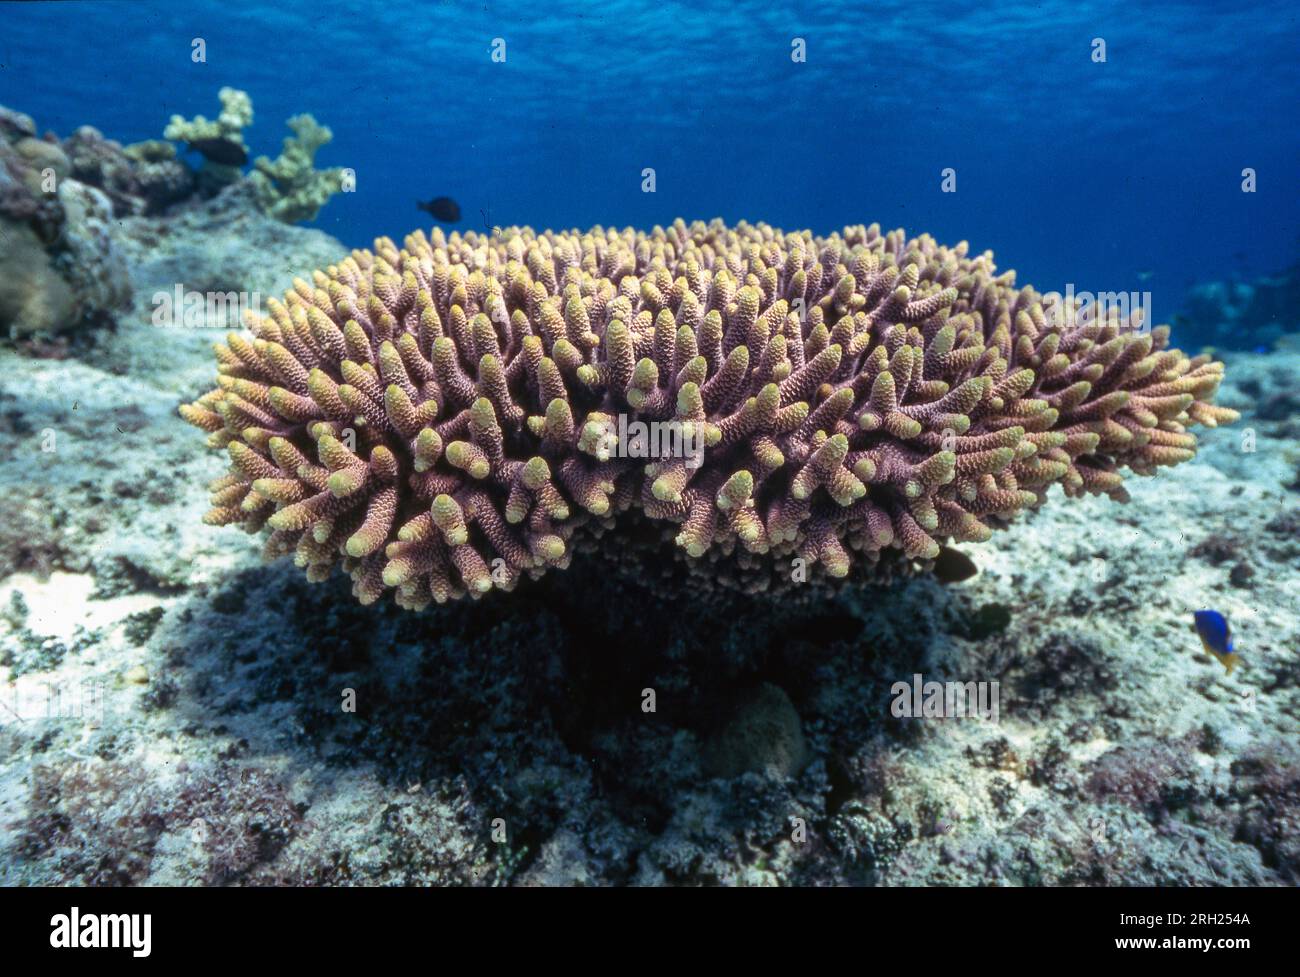 The stony coral Acropora millepora from shallow water at Flinder's Reef, the Coral Sea. Stock Photo